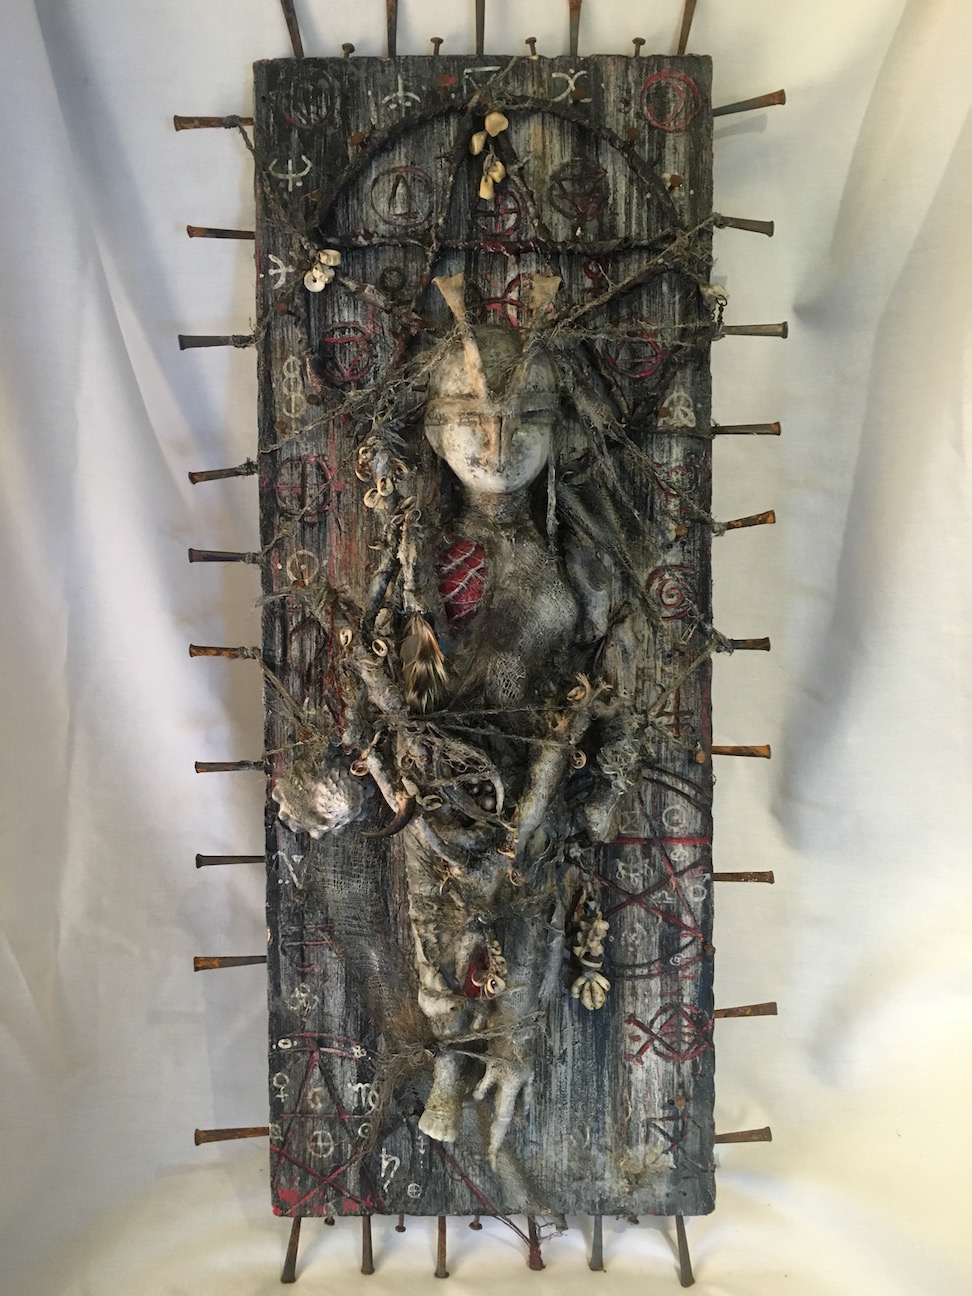 mixed media assemblage plaque bloody mummified babydoll with animal bones and pagan symbols